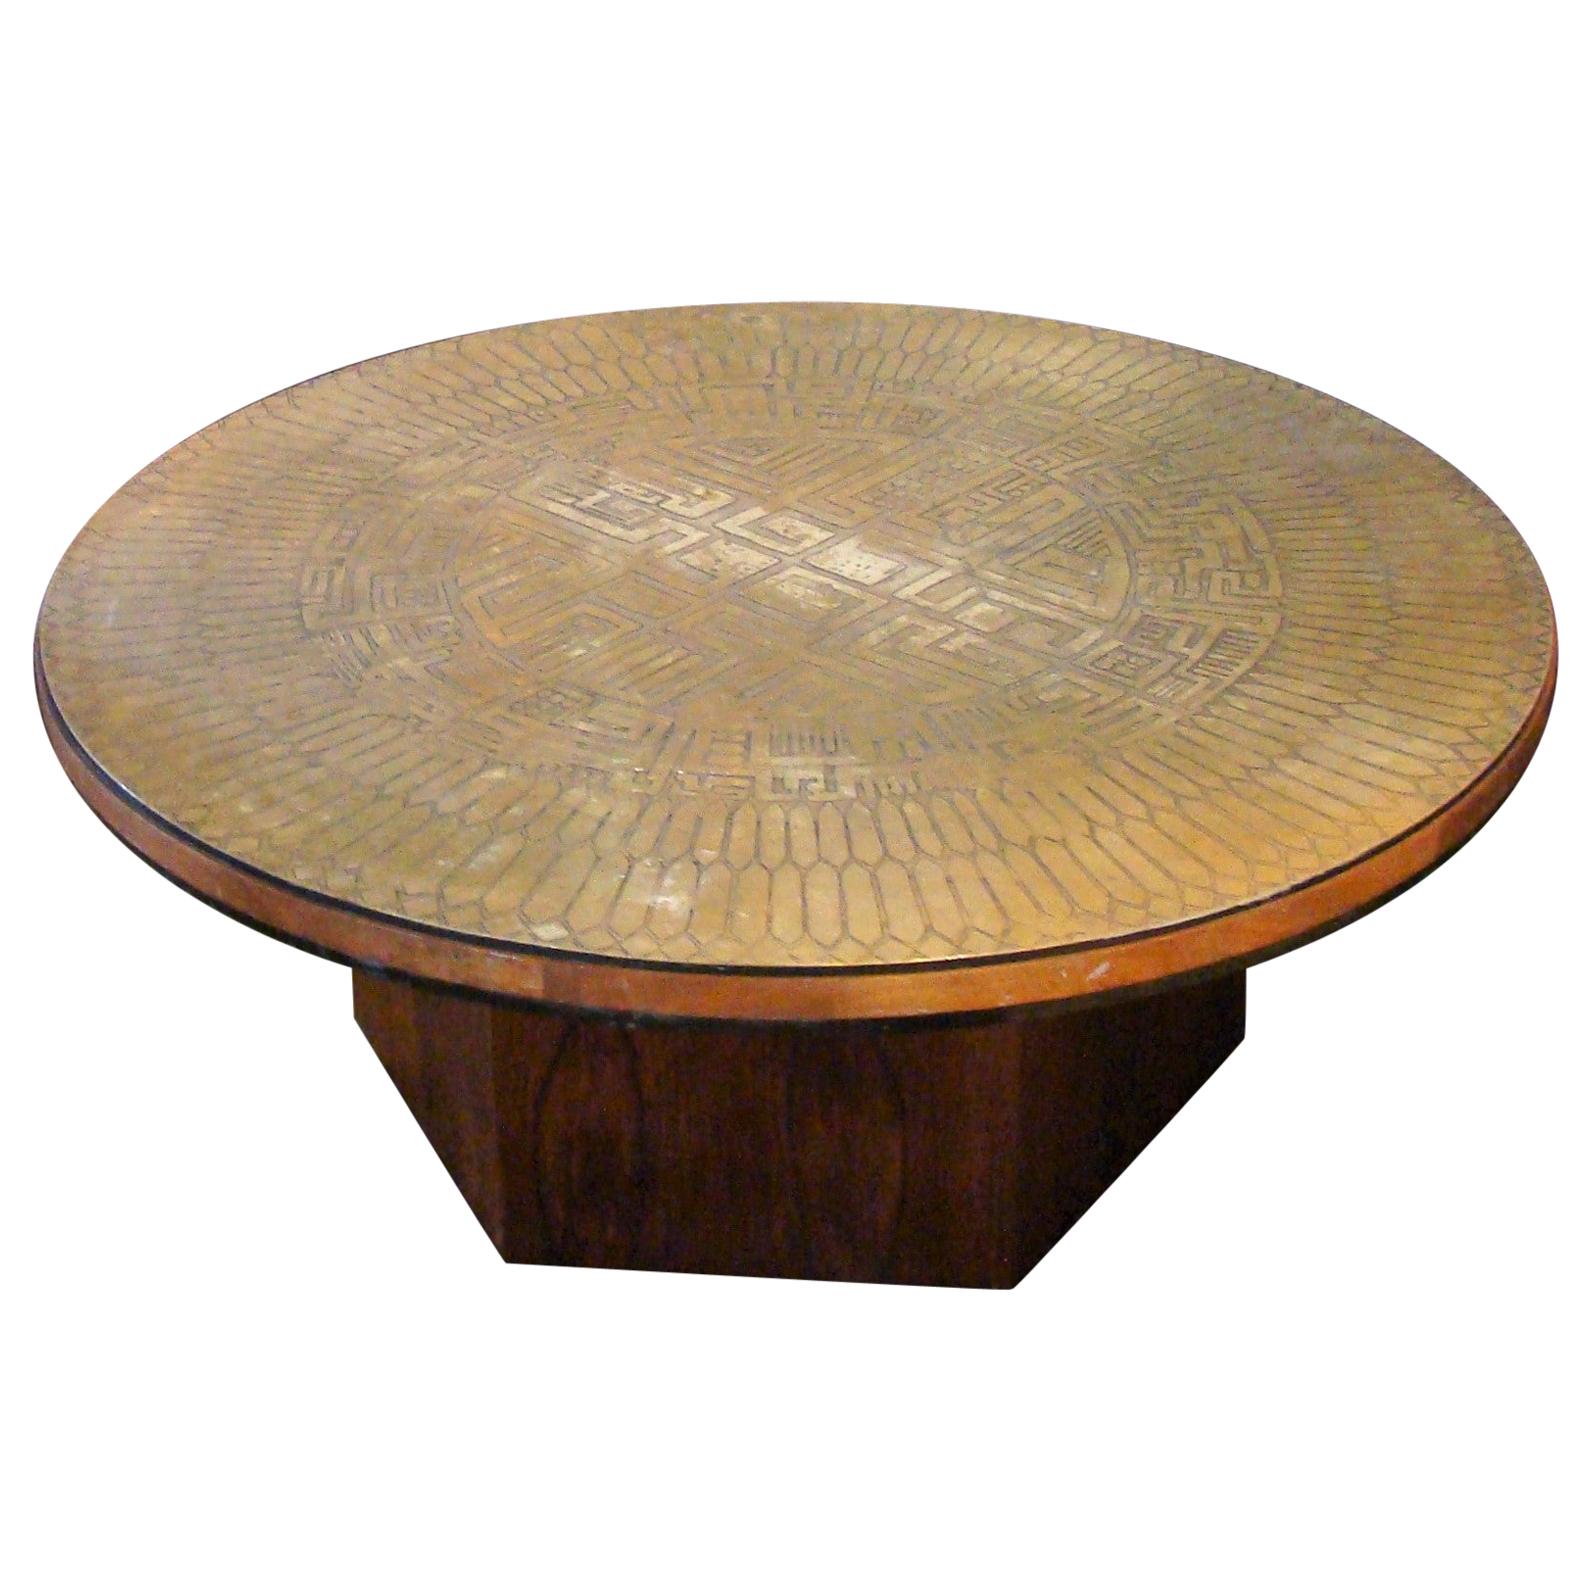 Embossed Brass and Walnut Round Coffee Table Artist Signed, G. Urso, Italy